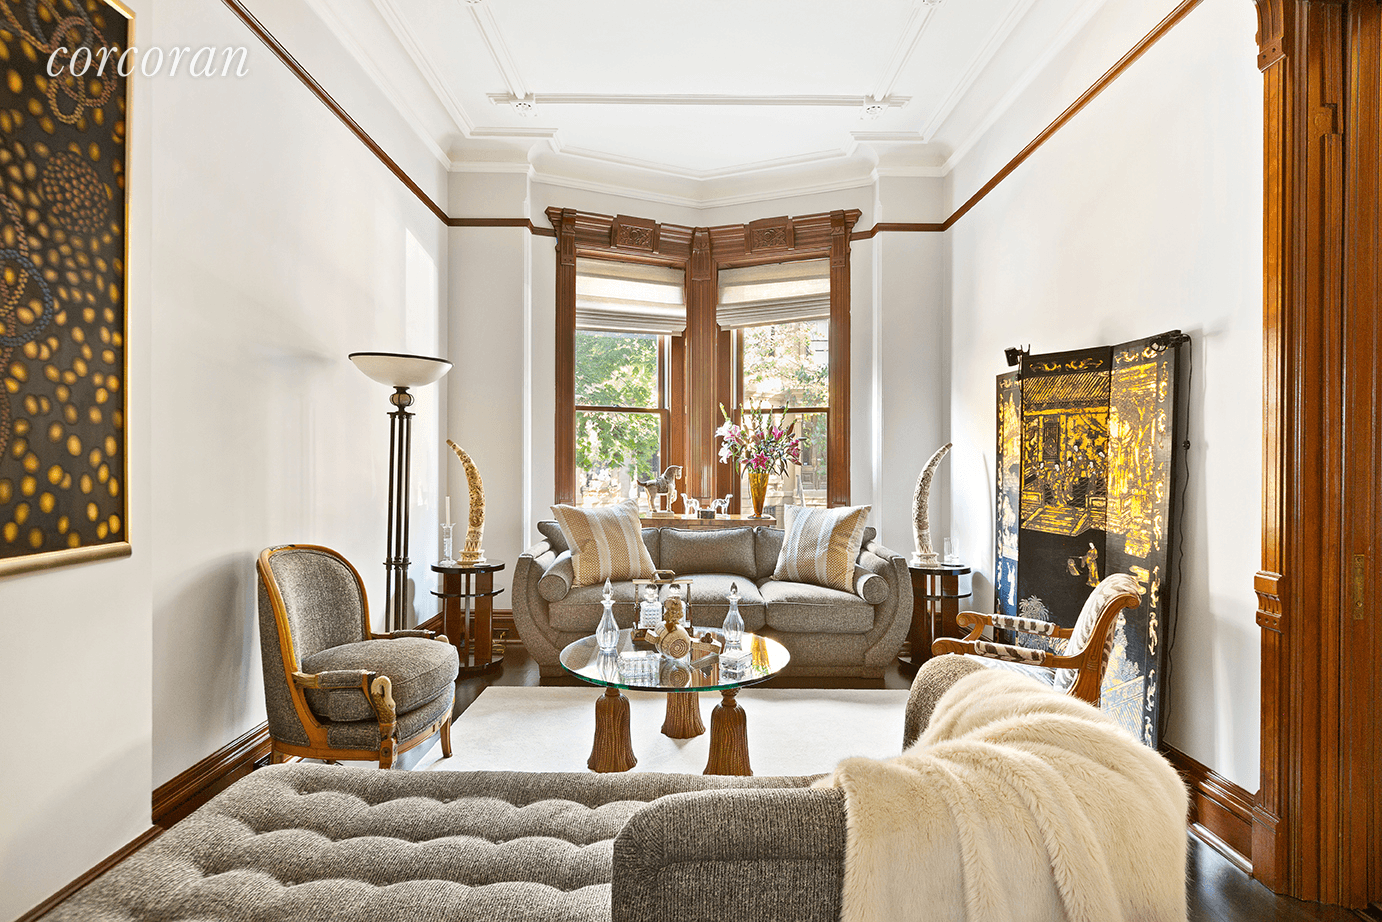 Rarely does such a stunning home come to market in Prime North Park Slope.